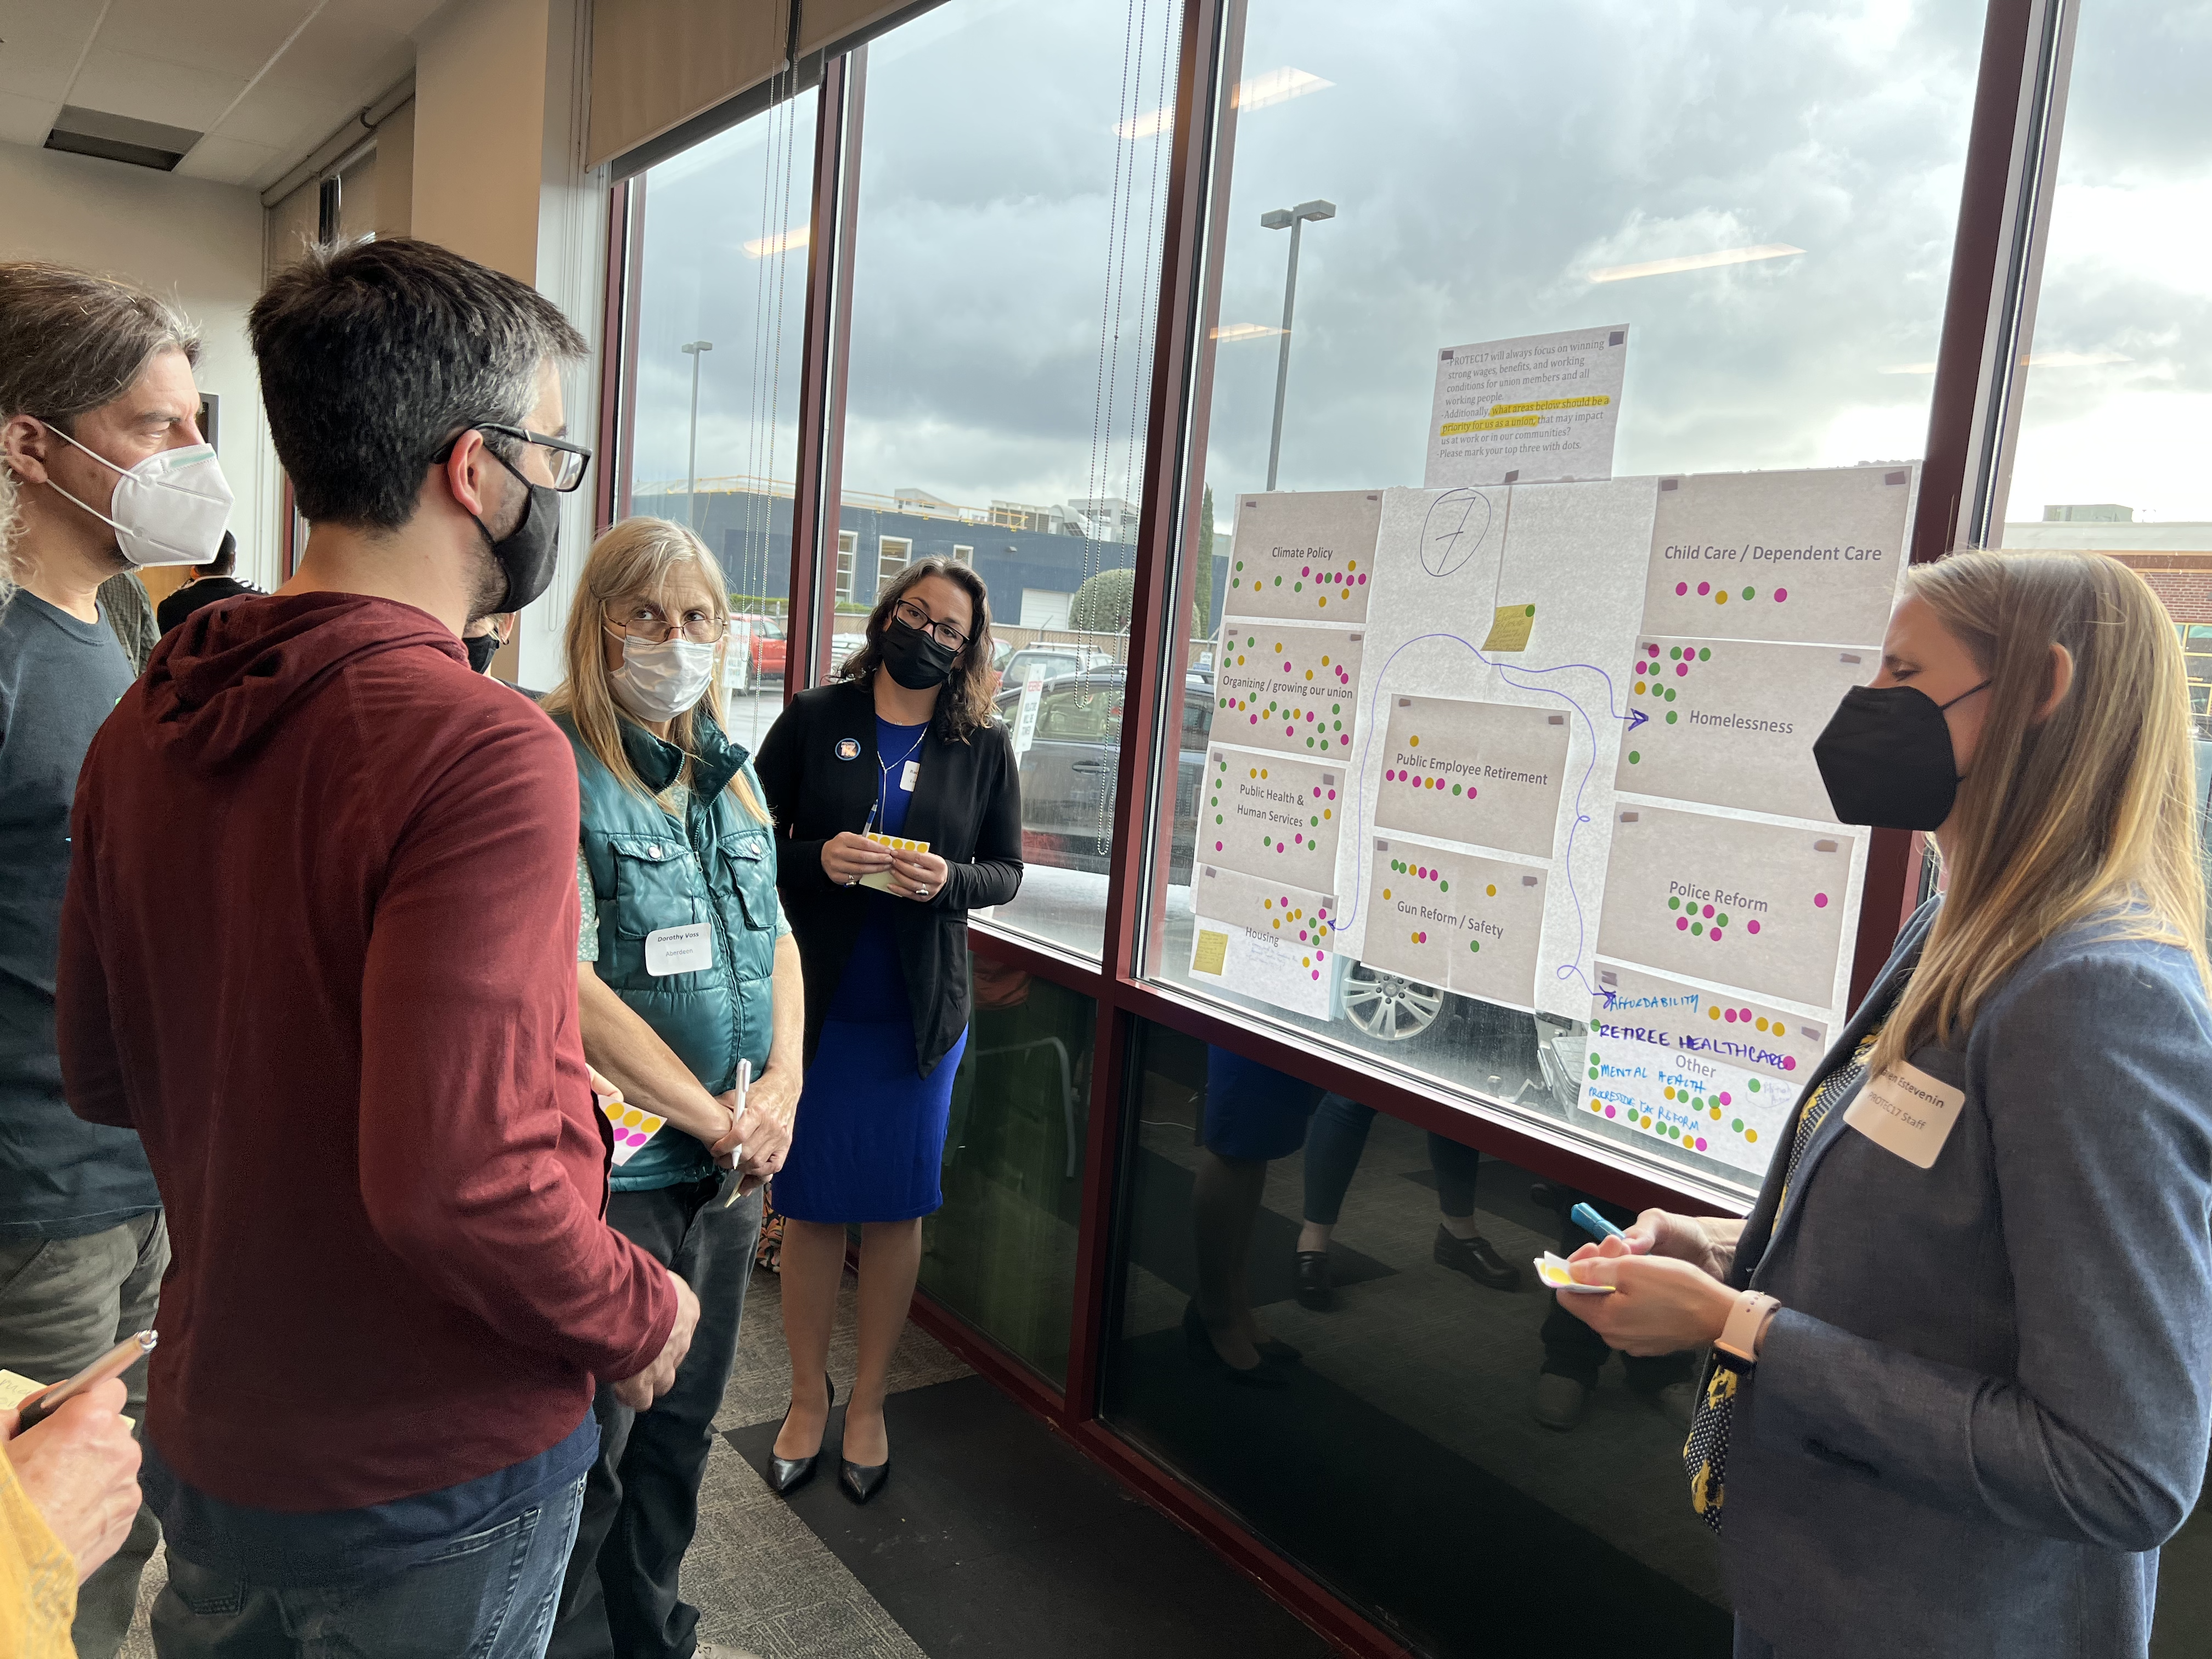 REC Delegates Nick CastroLang (Spokane Health), Paul Cone (Portland) and Dorothy Voss (WSDOT) give their input on priorities for the 2023-25 strategic plan, as PROTEC17 President Rachael Brooks (Seattle) and Executive Director Karen Estevenin look on.